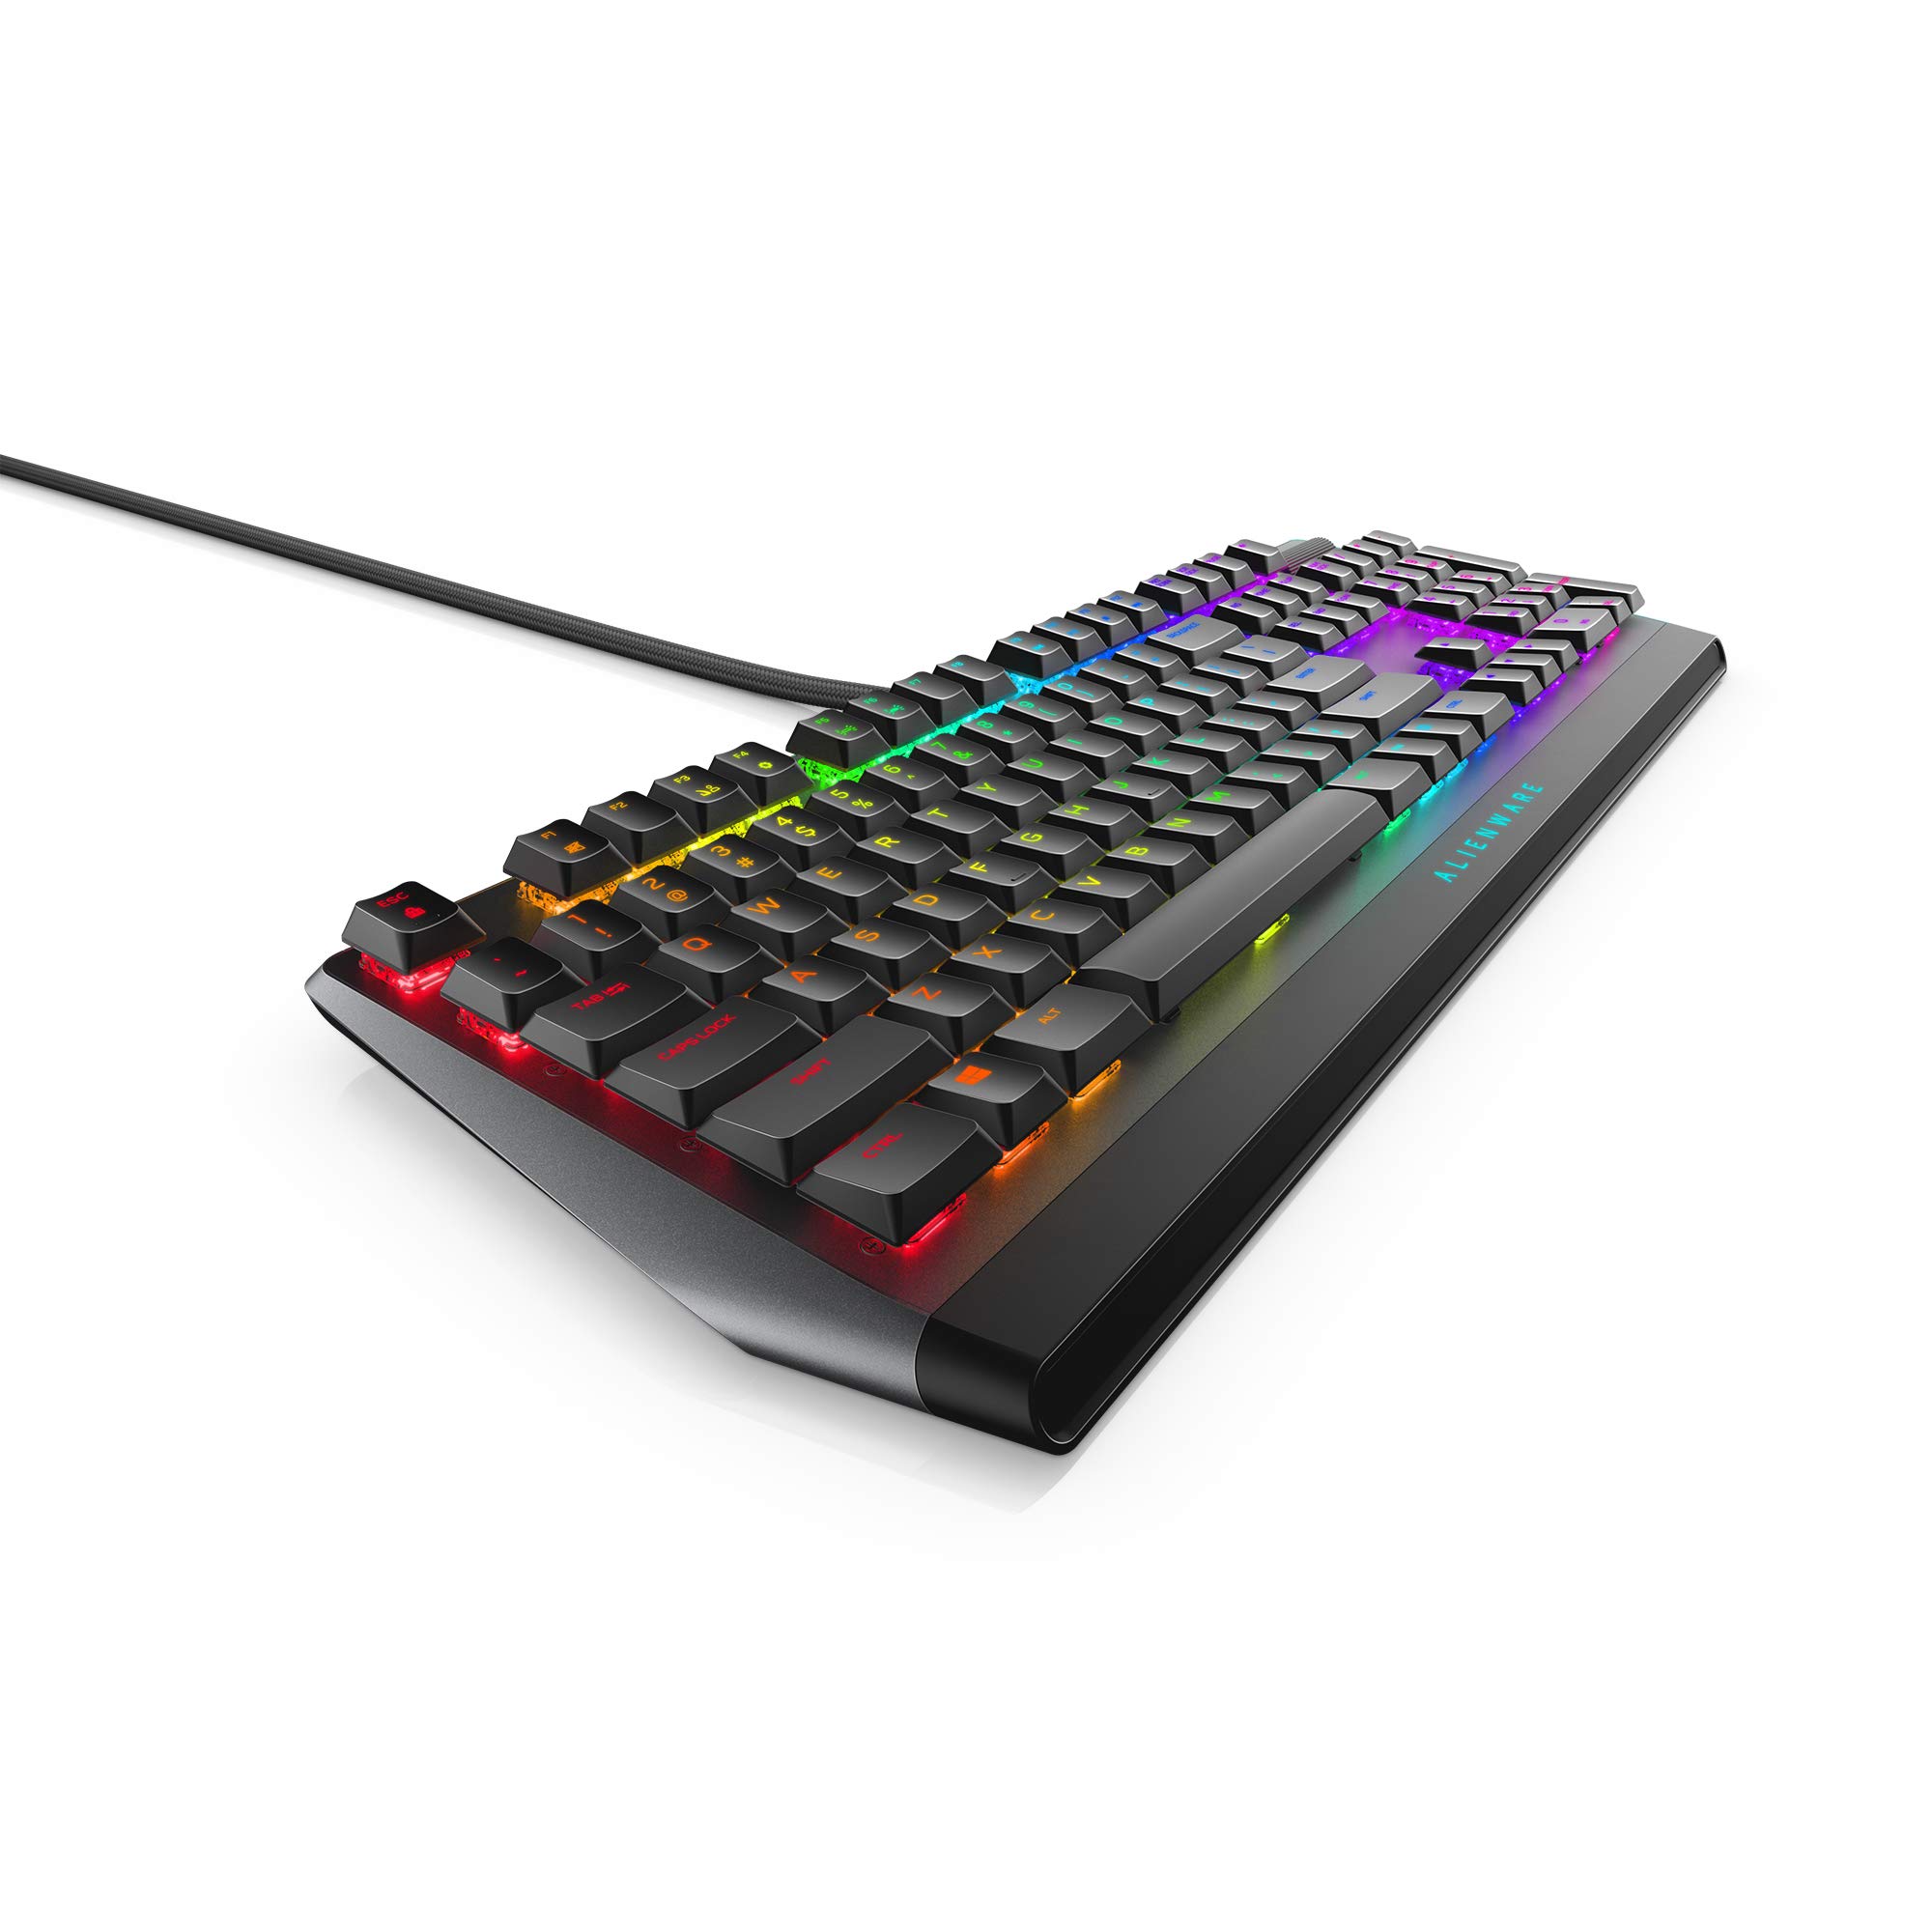 Alienware Low-Profile RGB Gaming Keyboard AW510K: Alienfx Per Key RGB LED - Media CONTROLS & USB Passthrough - Cherry MX Low Profile Red Switches